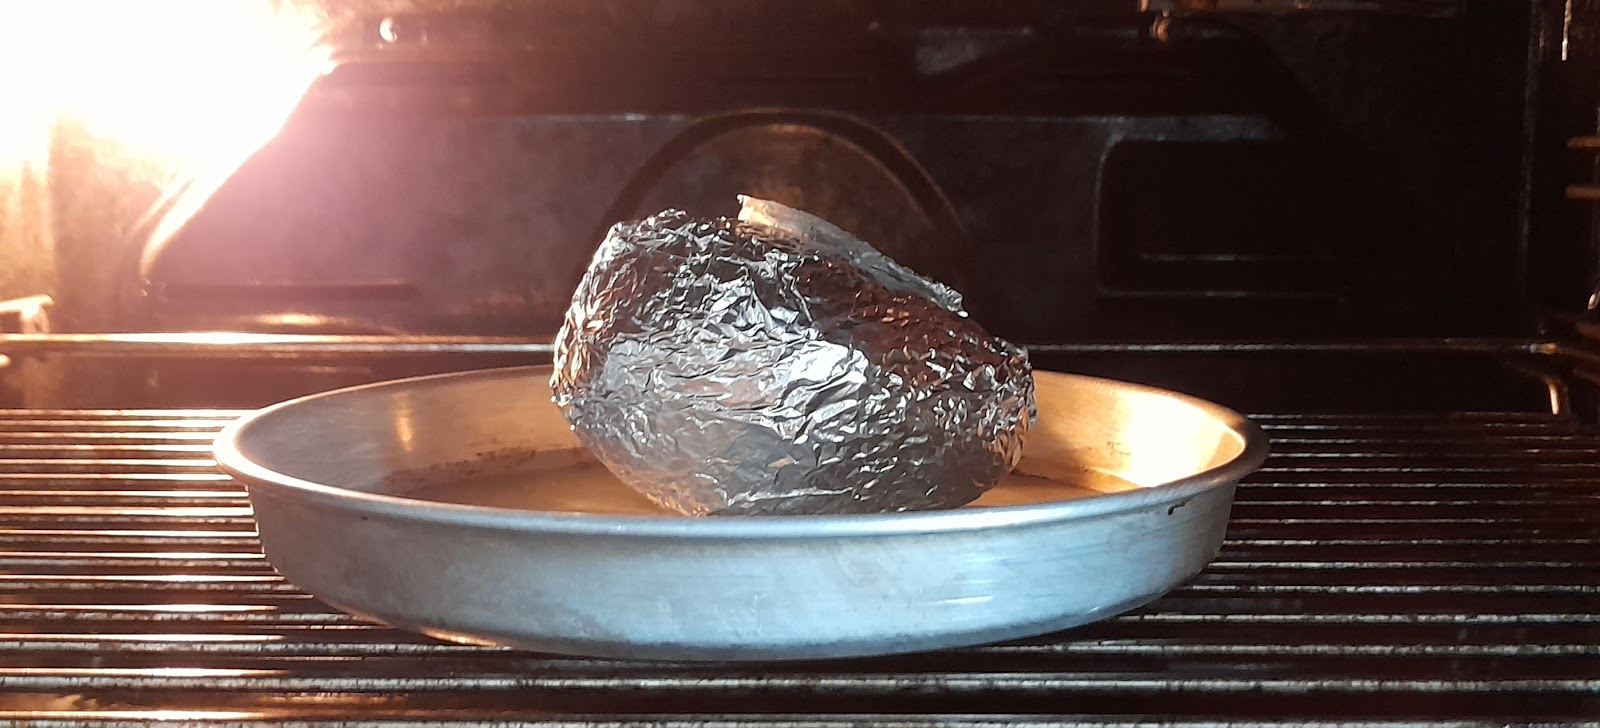 Avocado wrapped in aluminum foil in the oven.